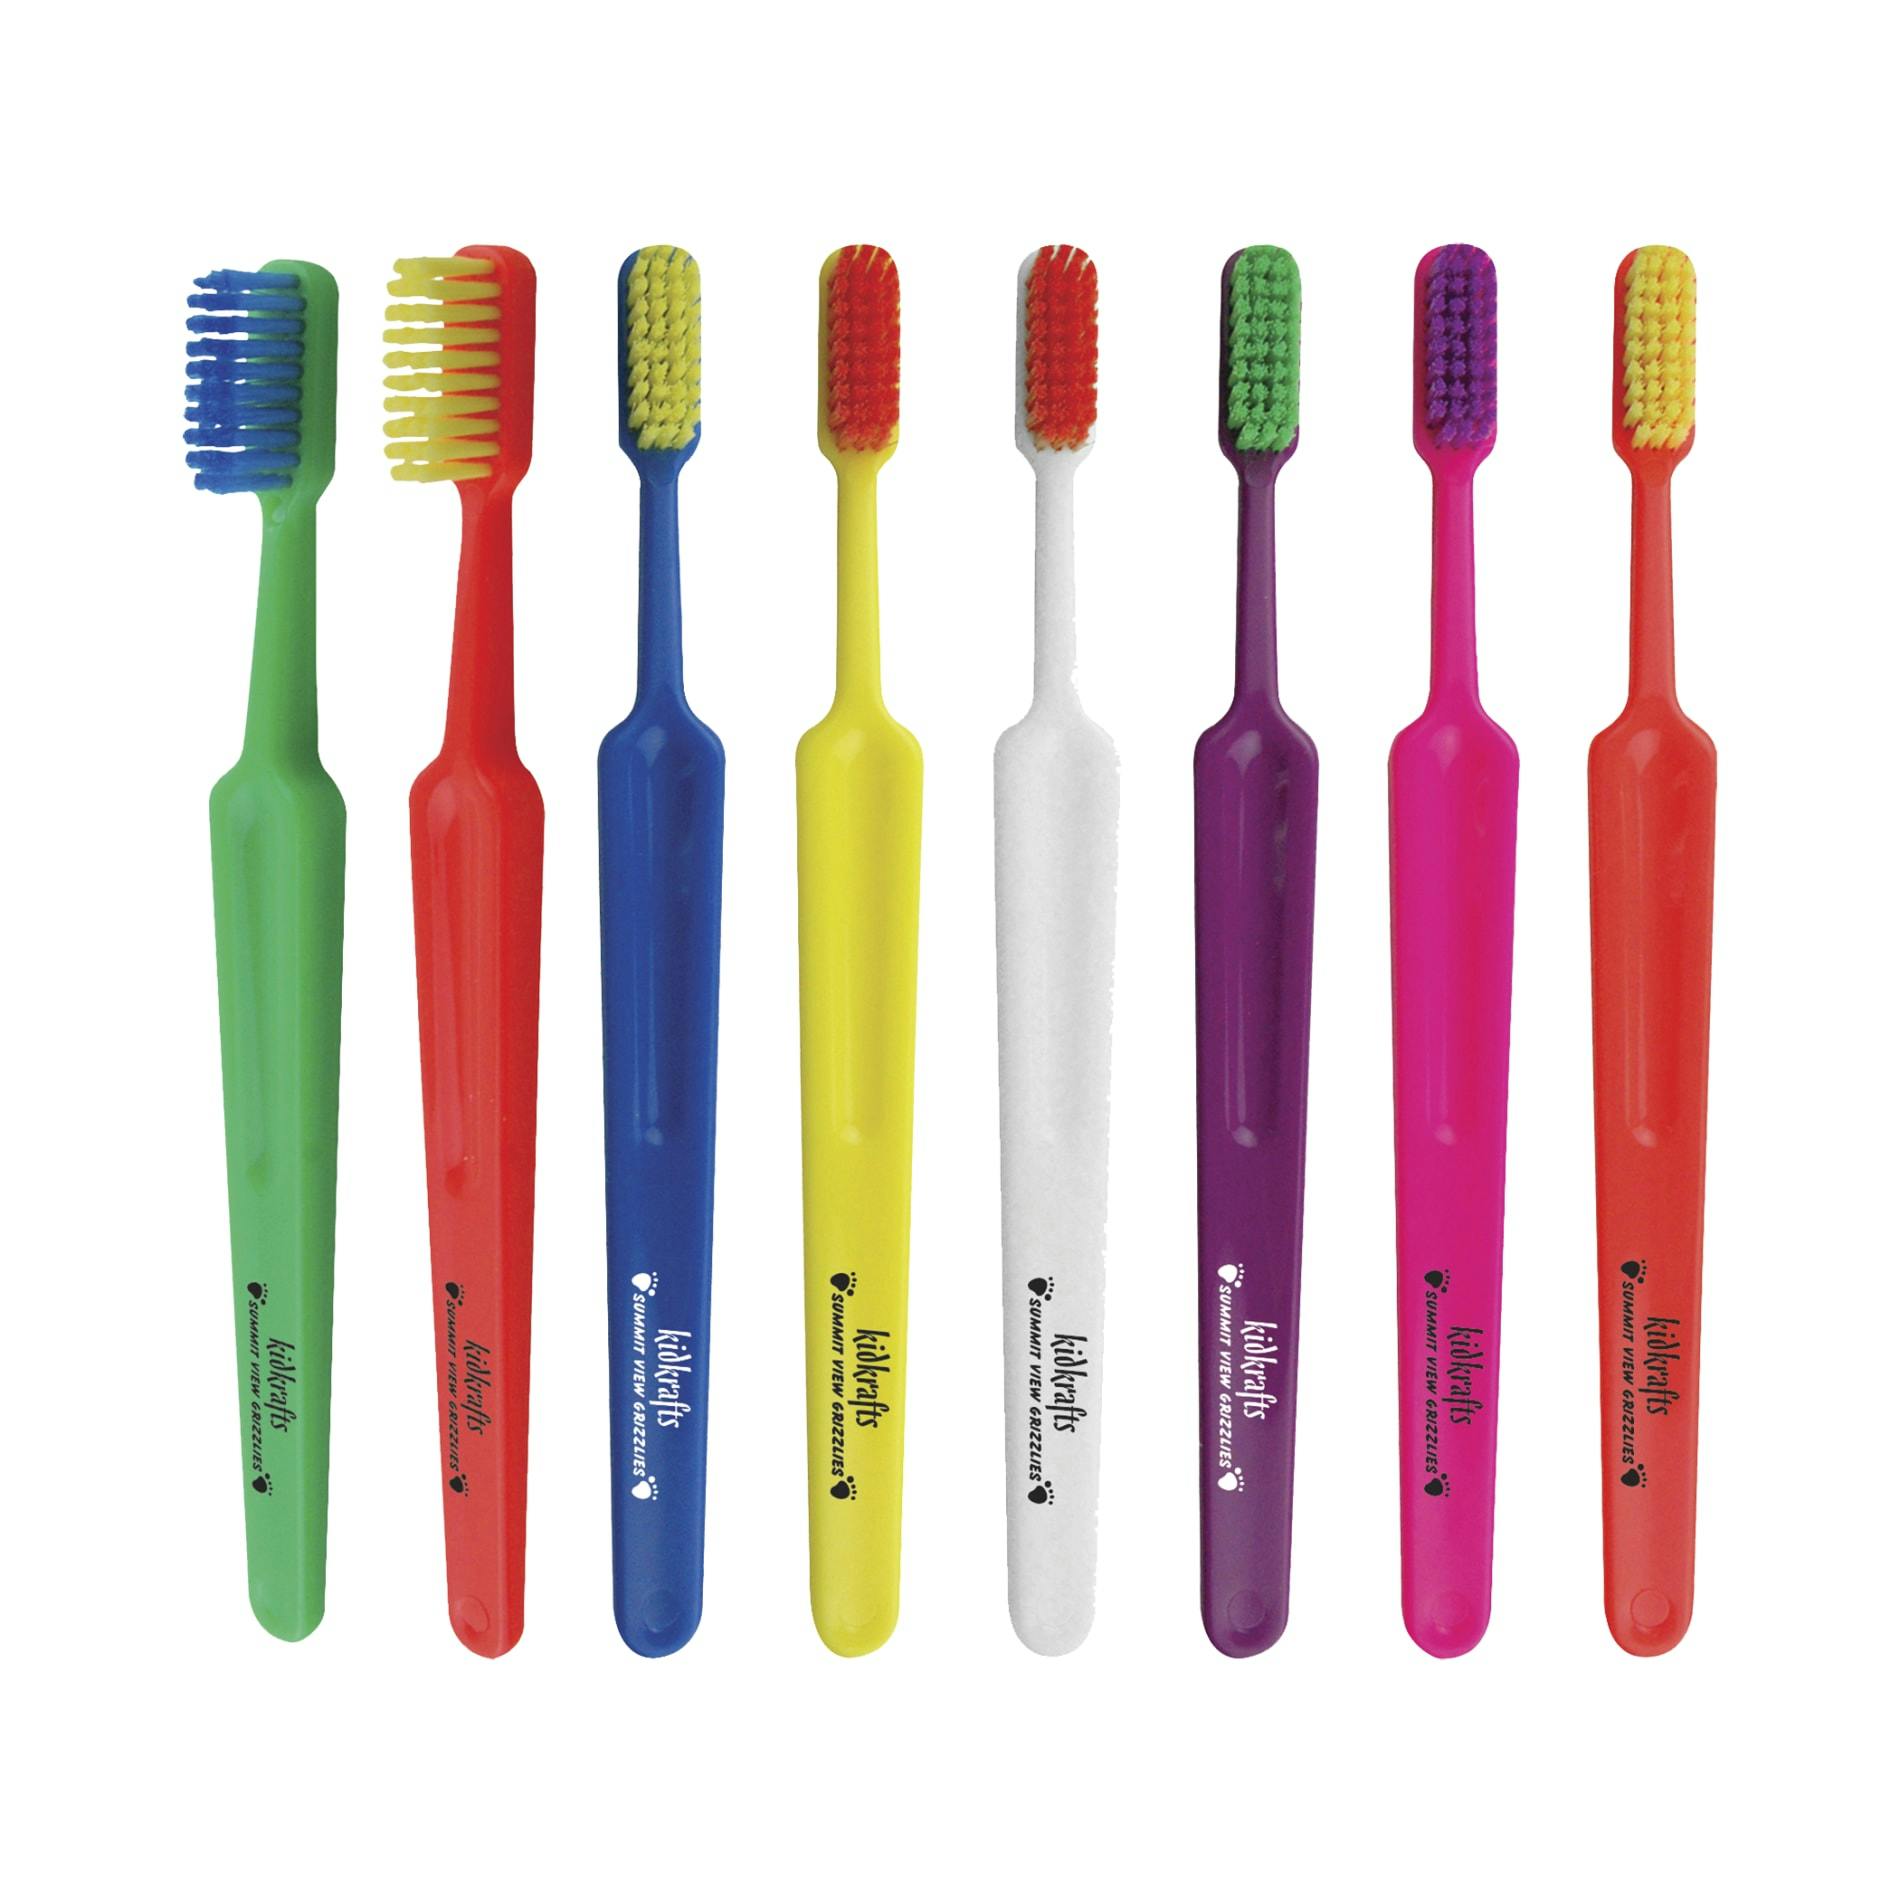 Concept Bright Toothbrush - additional Image 2